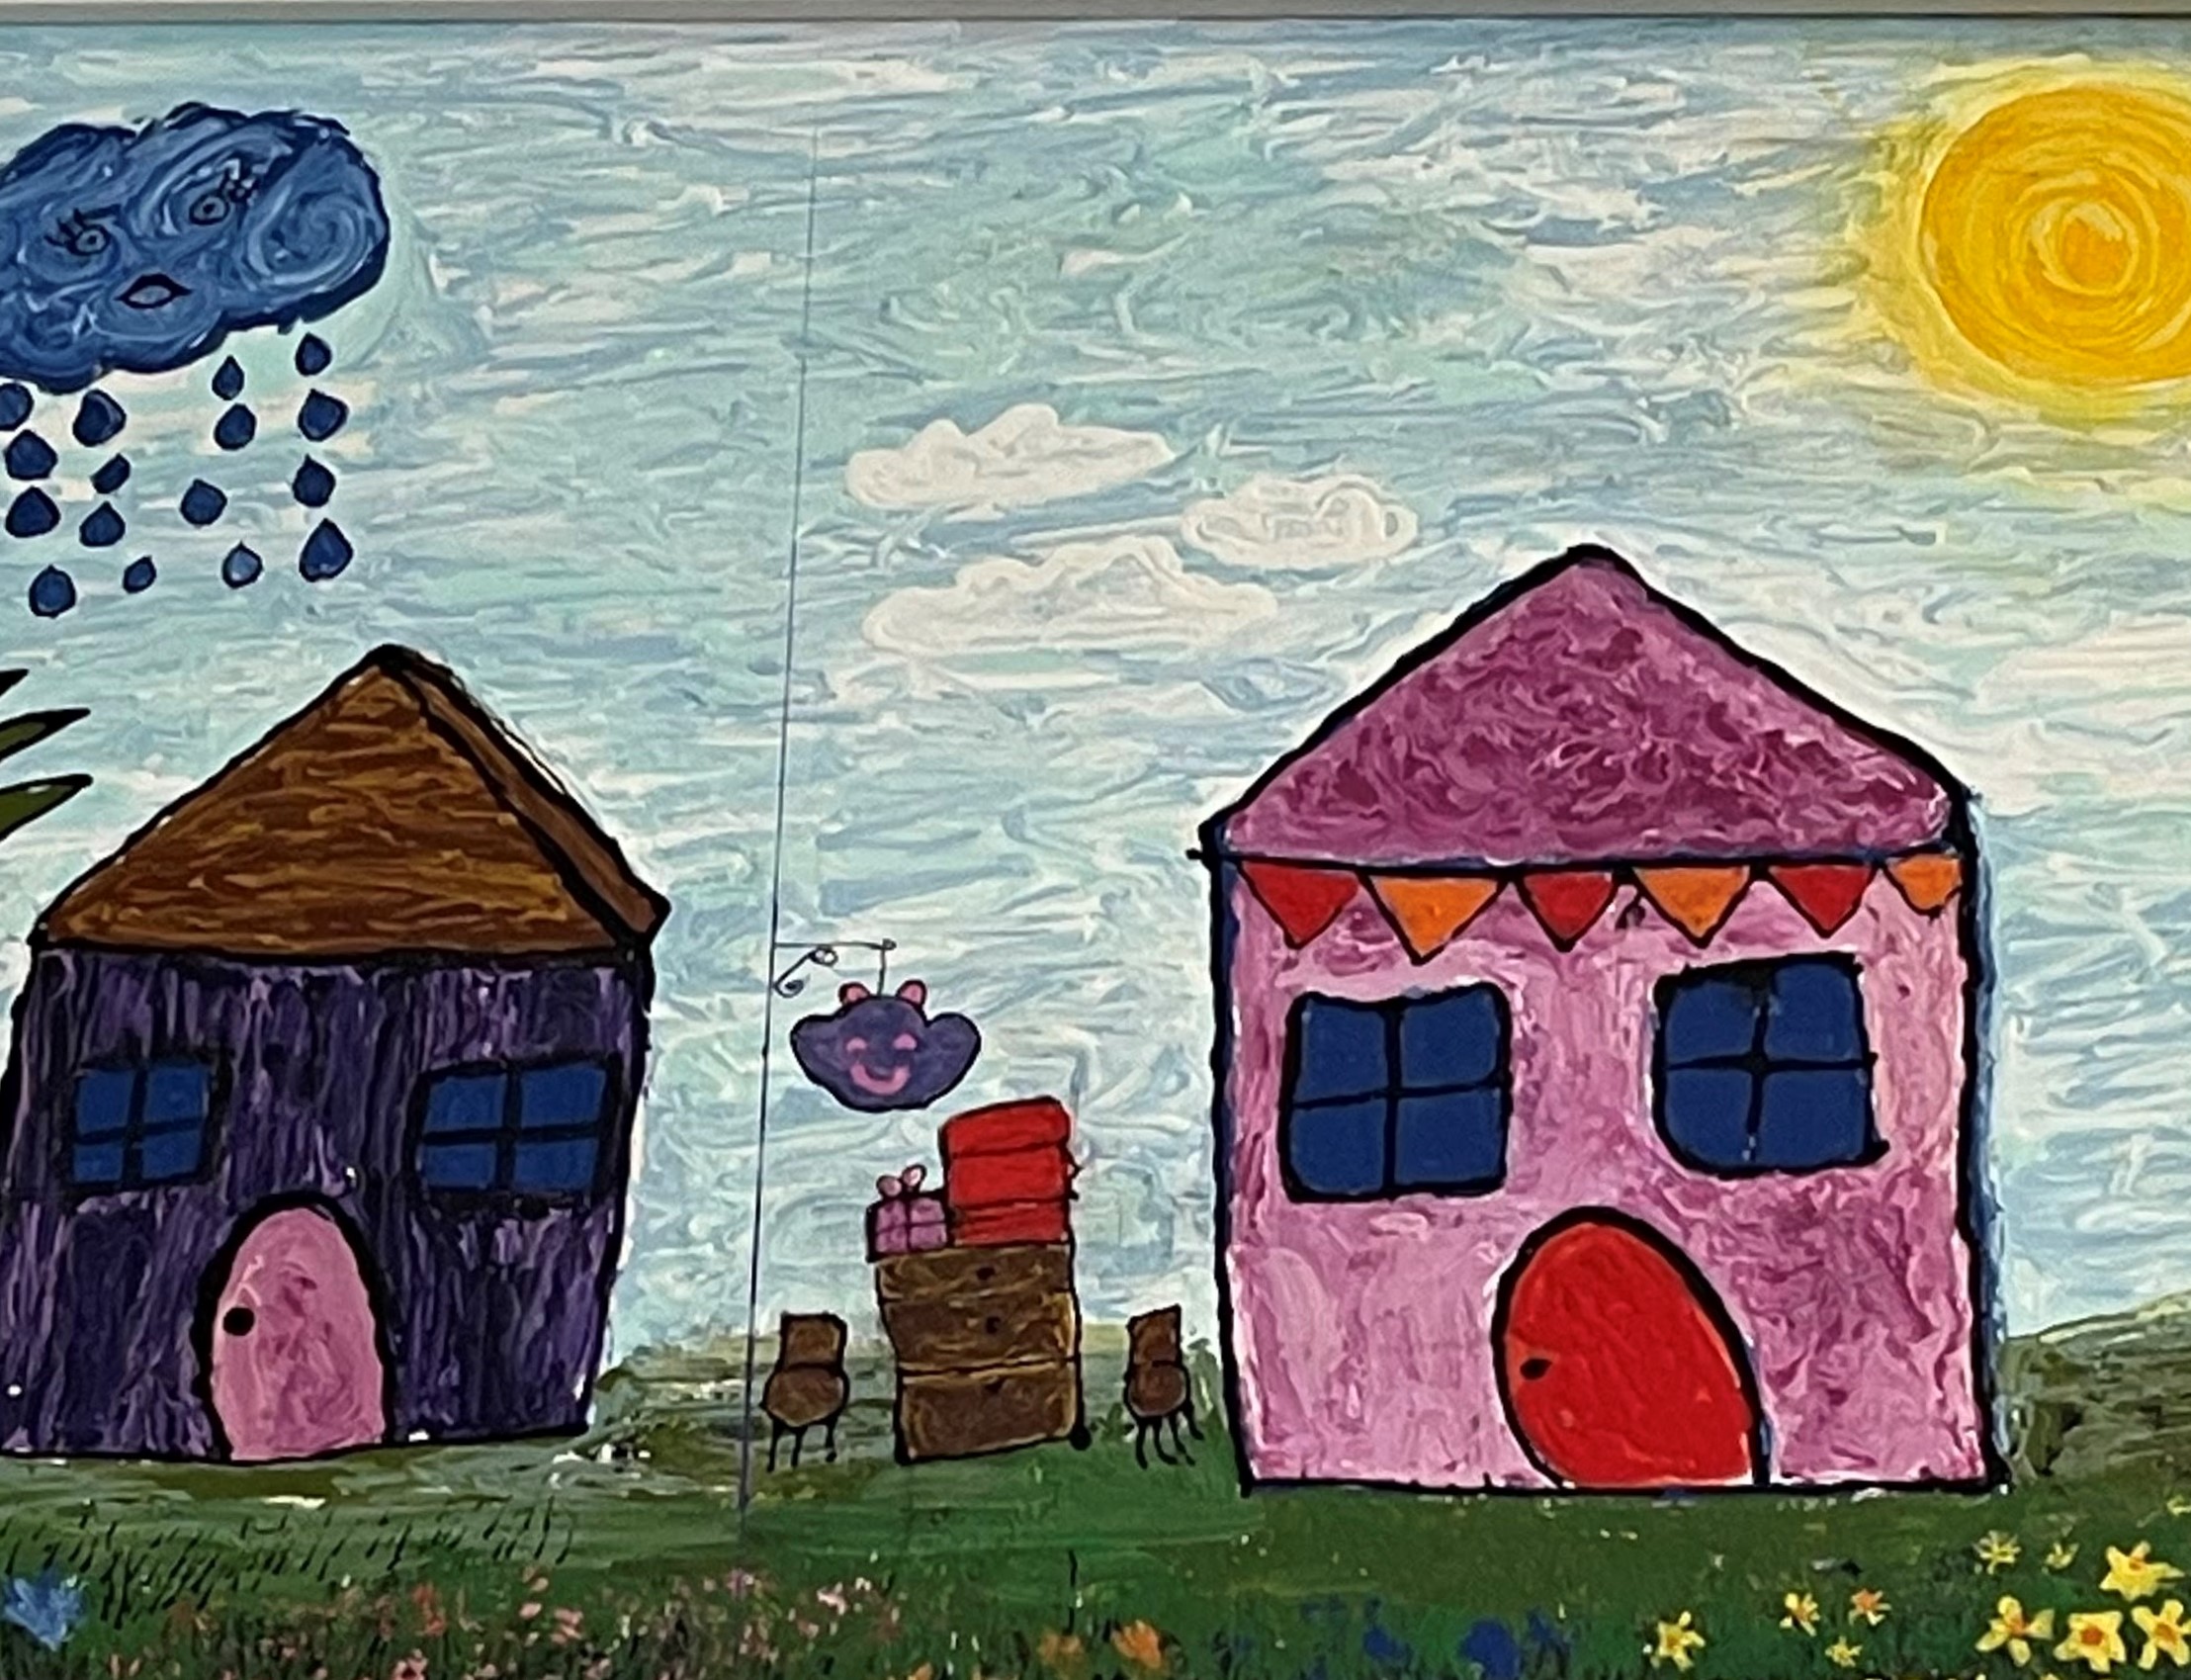 Painting of two houses, one with a rancloud over it and the other with sunshine over it.